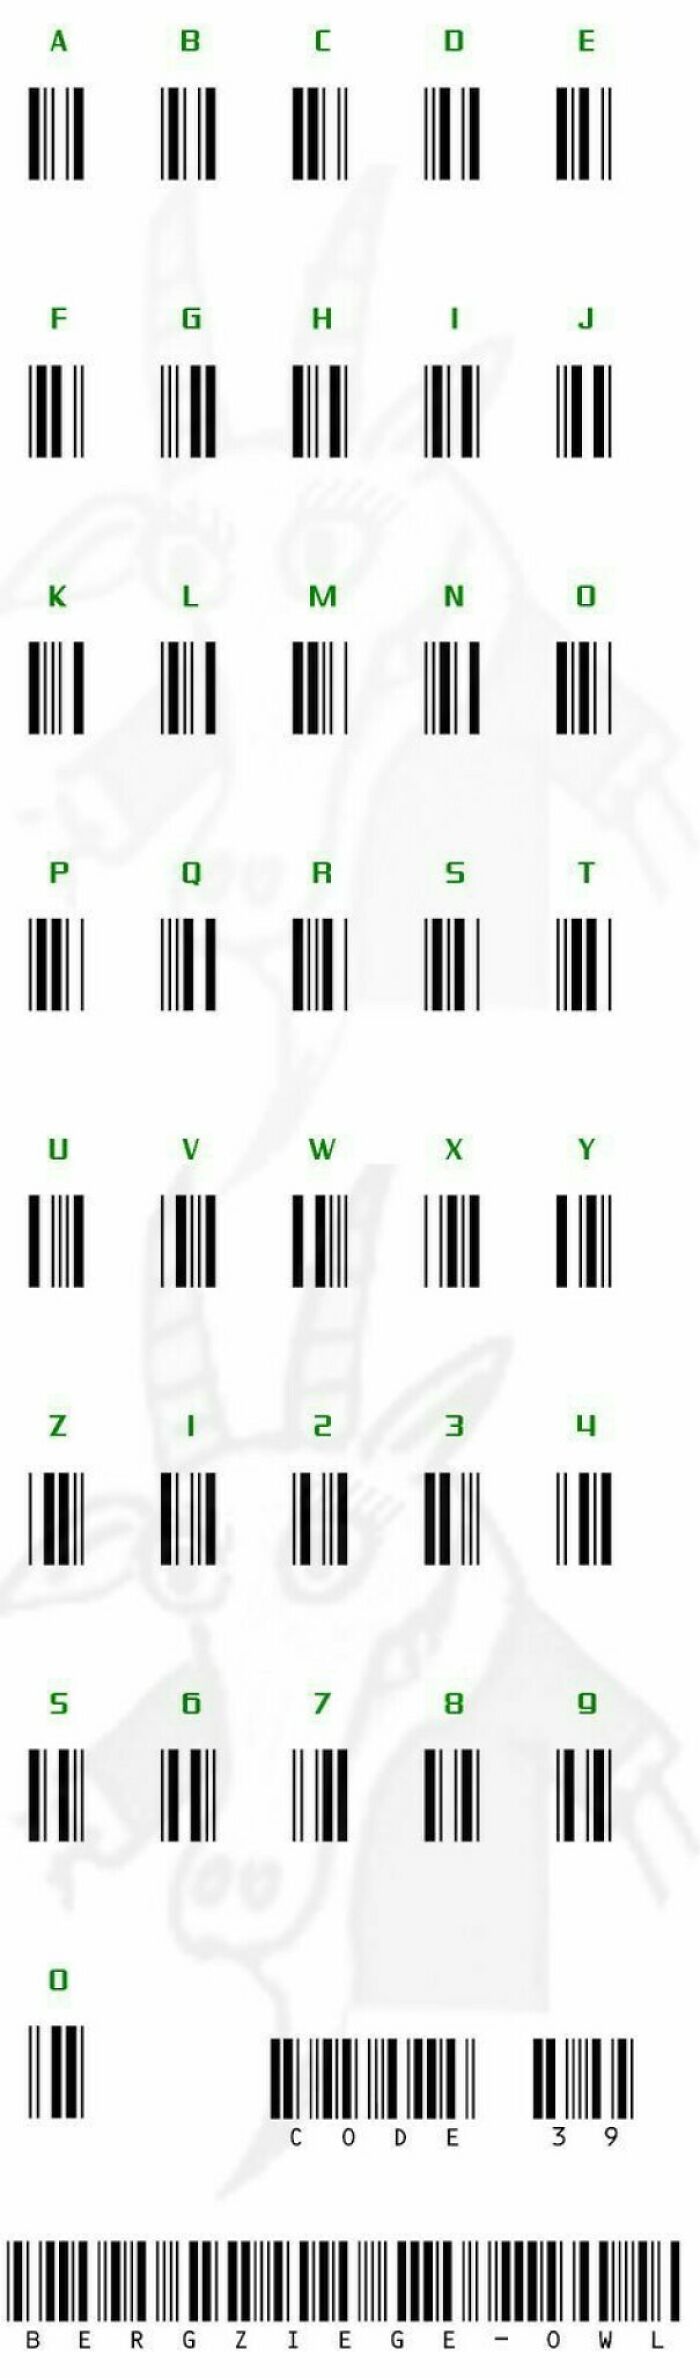 How A Bar Code Supposedly Works